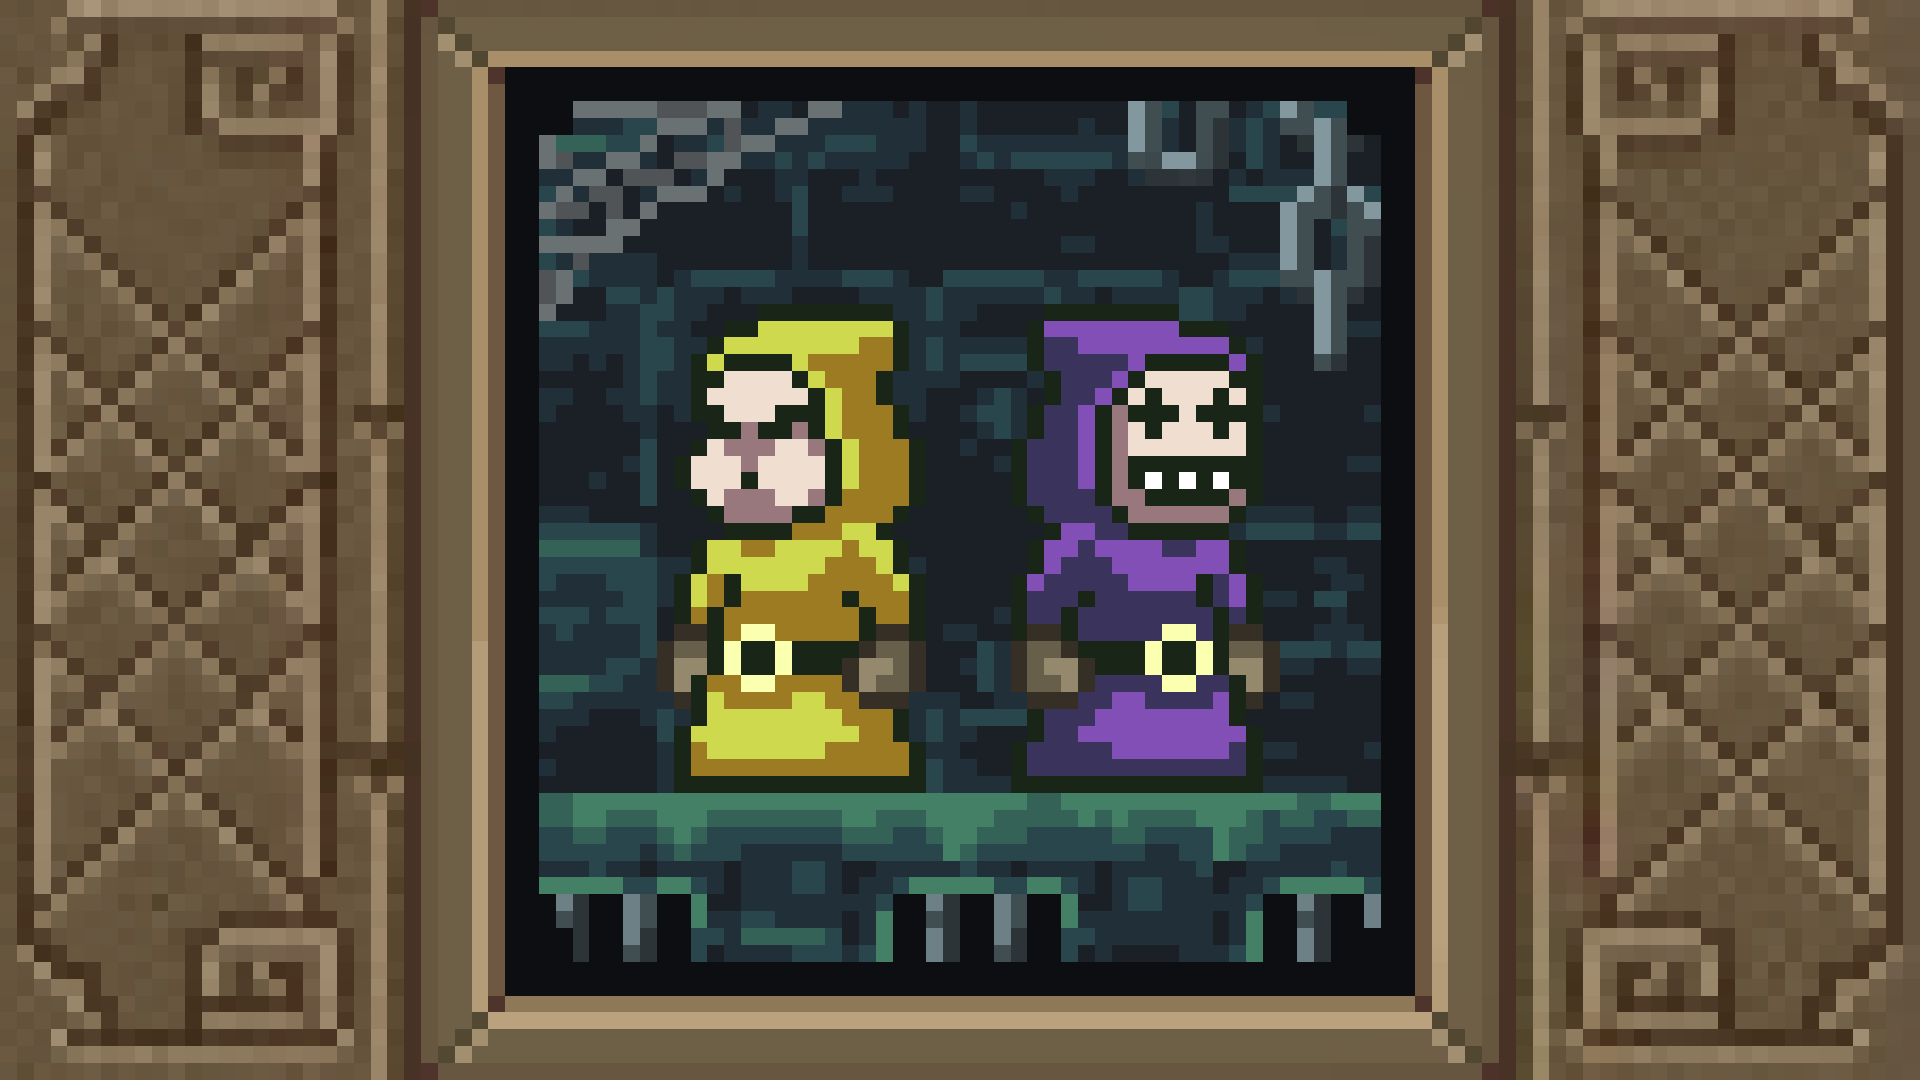 Icon for Dungeon Master